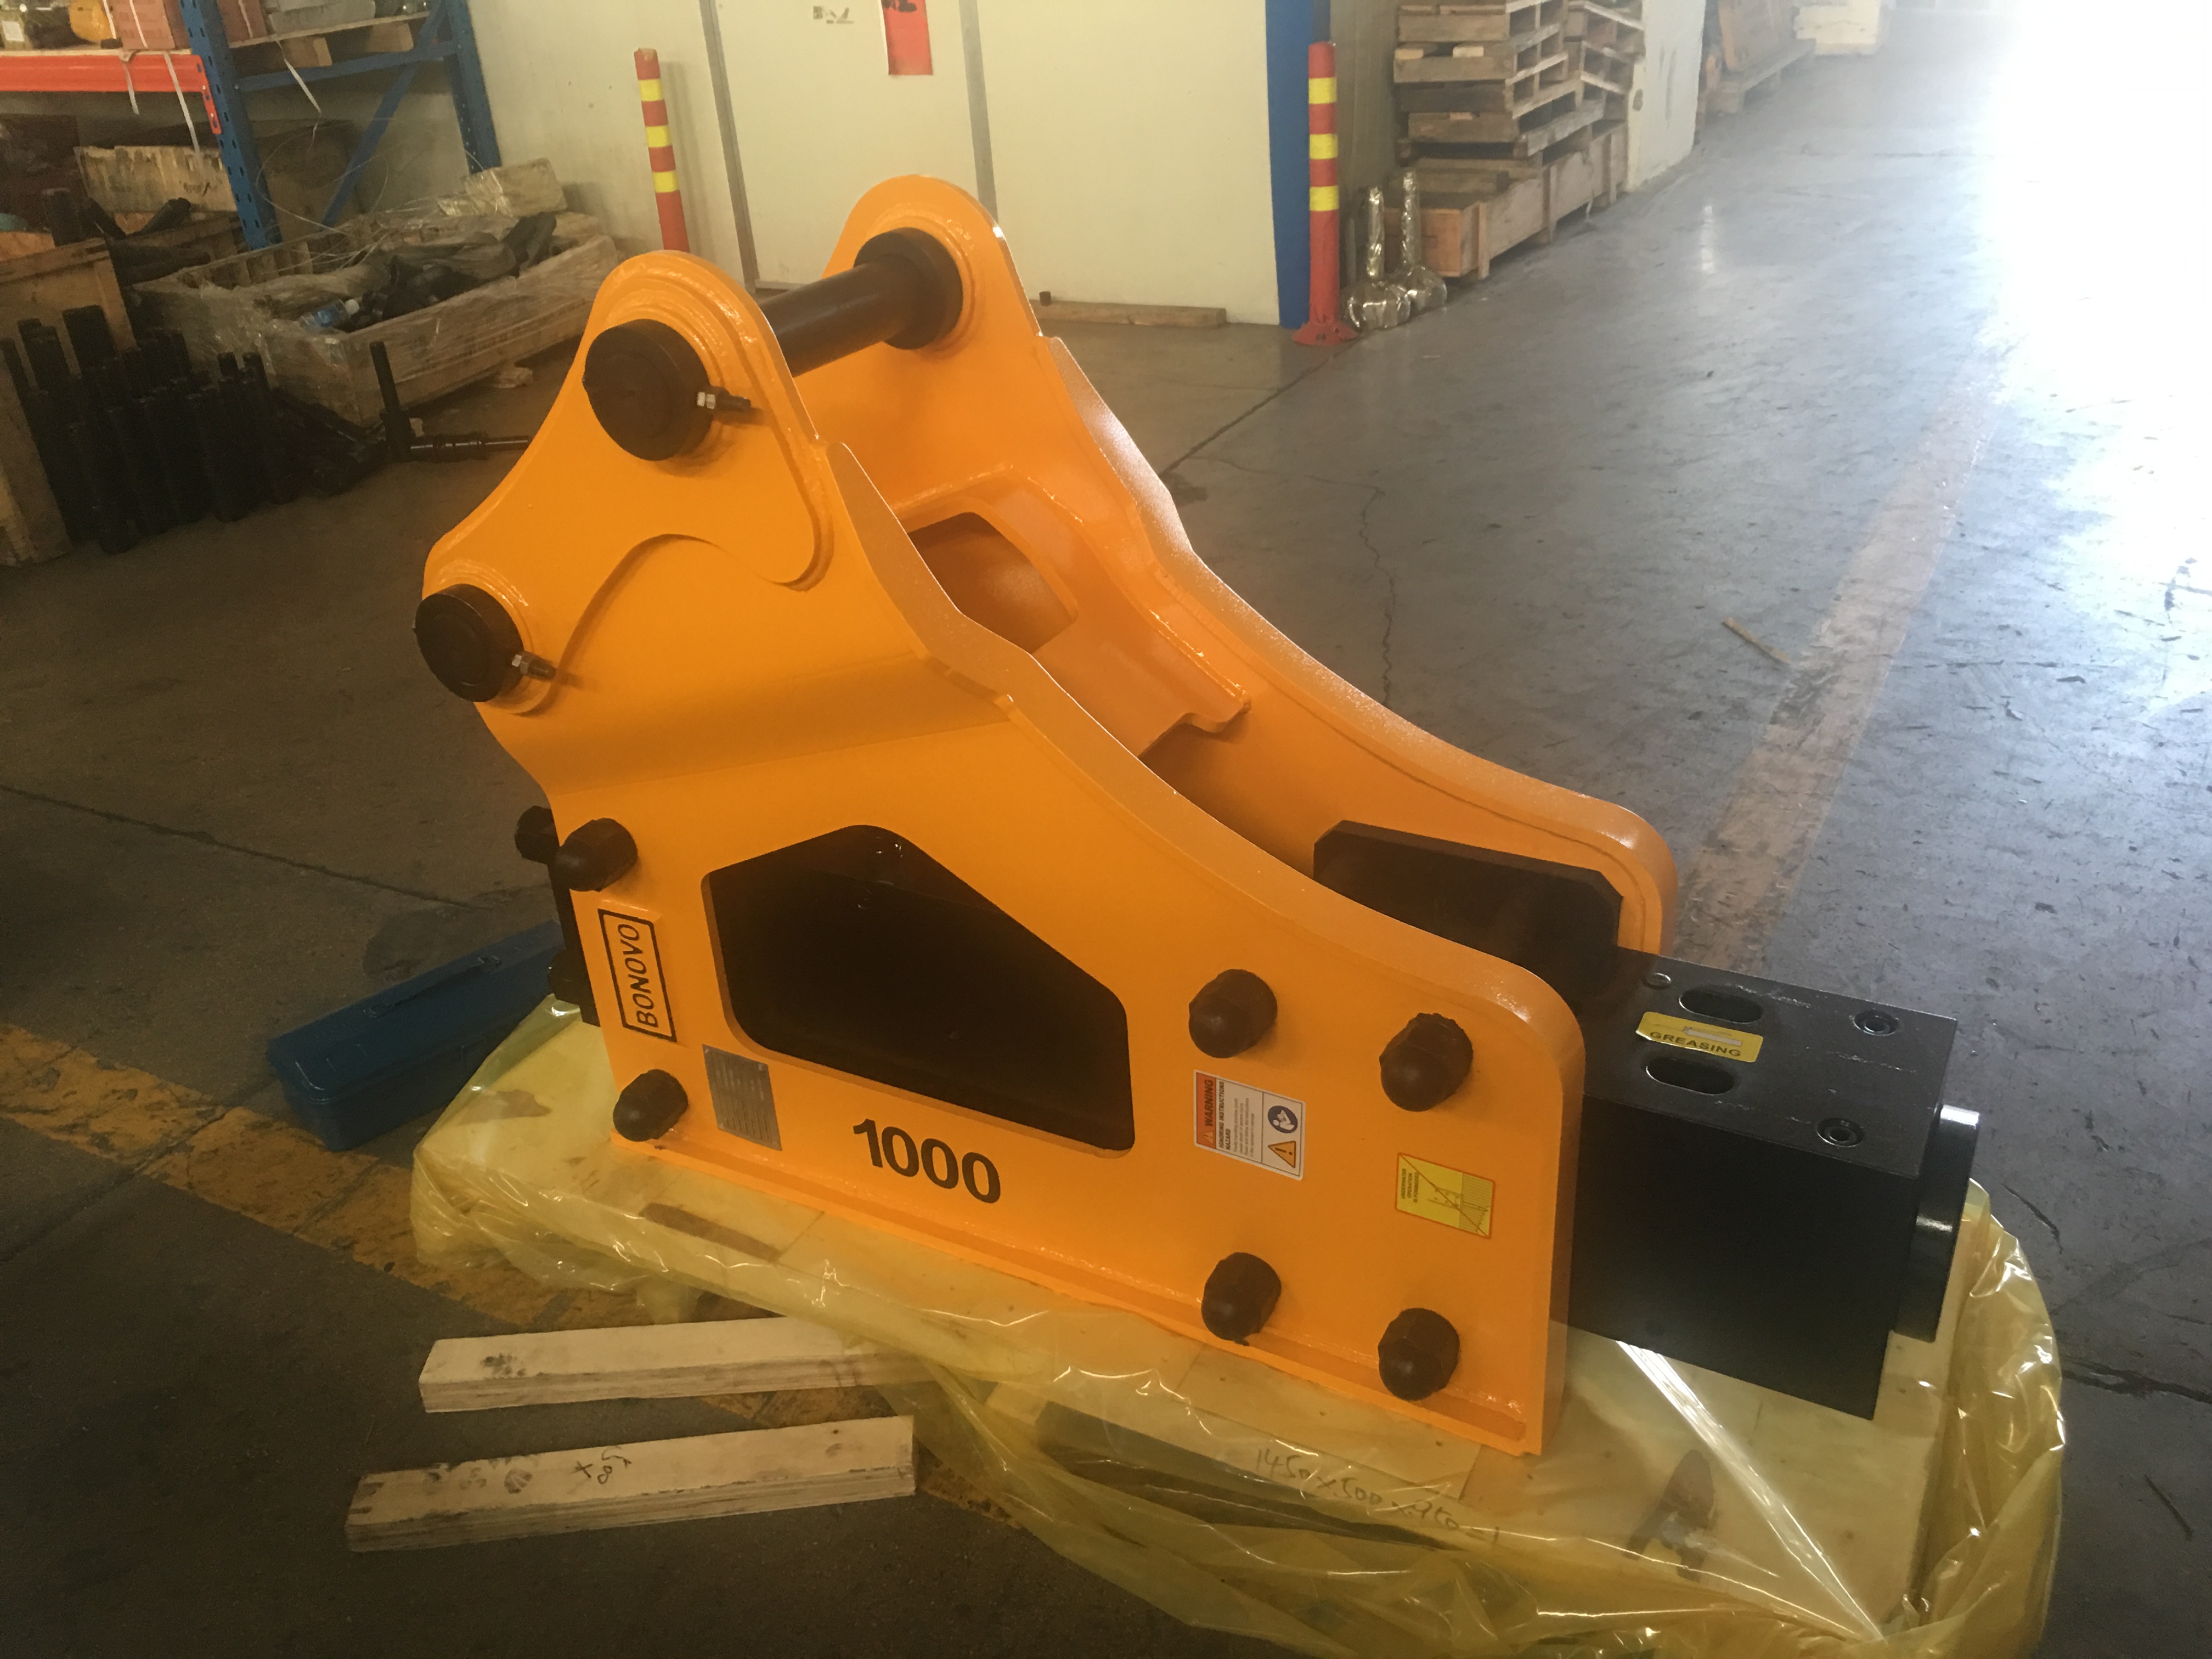 Manufacturing Companies for Trackhoe With Thumb - Bonovo China Side breaker Excavator Hydraulic Breaker Hammer for various excavator types - Bonovo - Bonovo